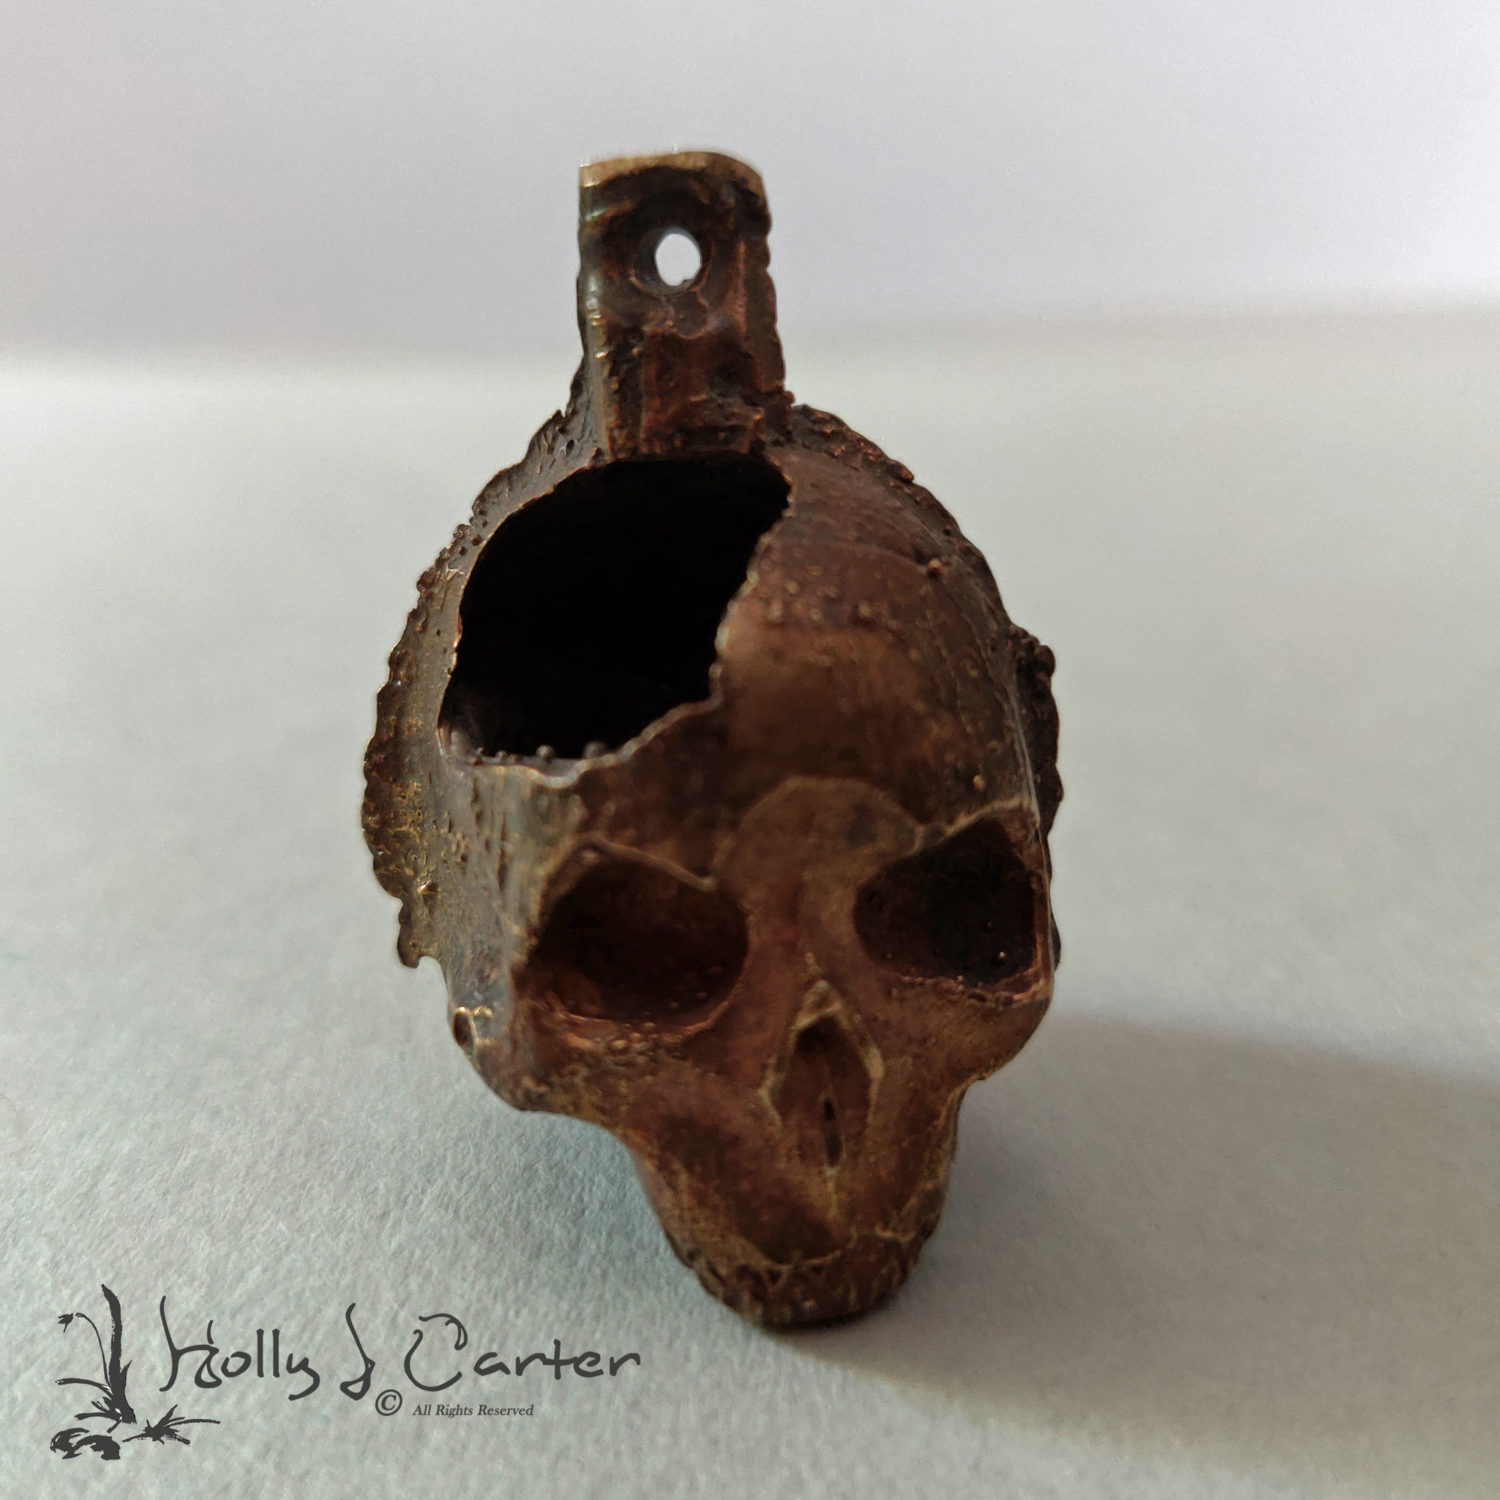 Skull handcrafted by metals artist Holly J Carter. Bronze with an aged finish. Great Halloween, Dia de los Muertos, Biker, or Goth Pendant, Key Chain Fob, or Charm.